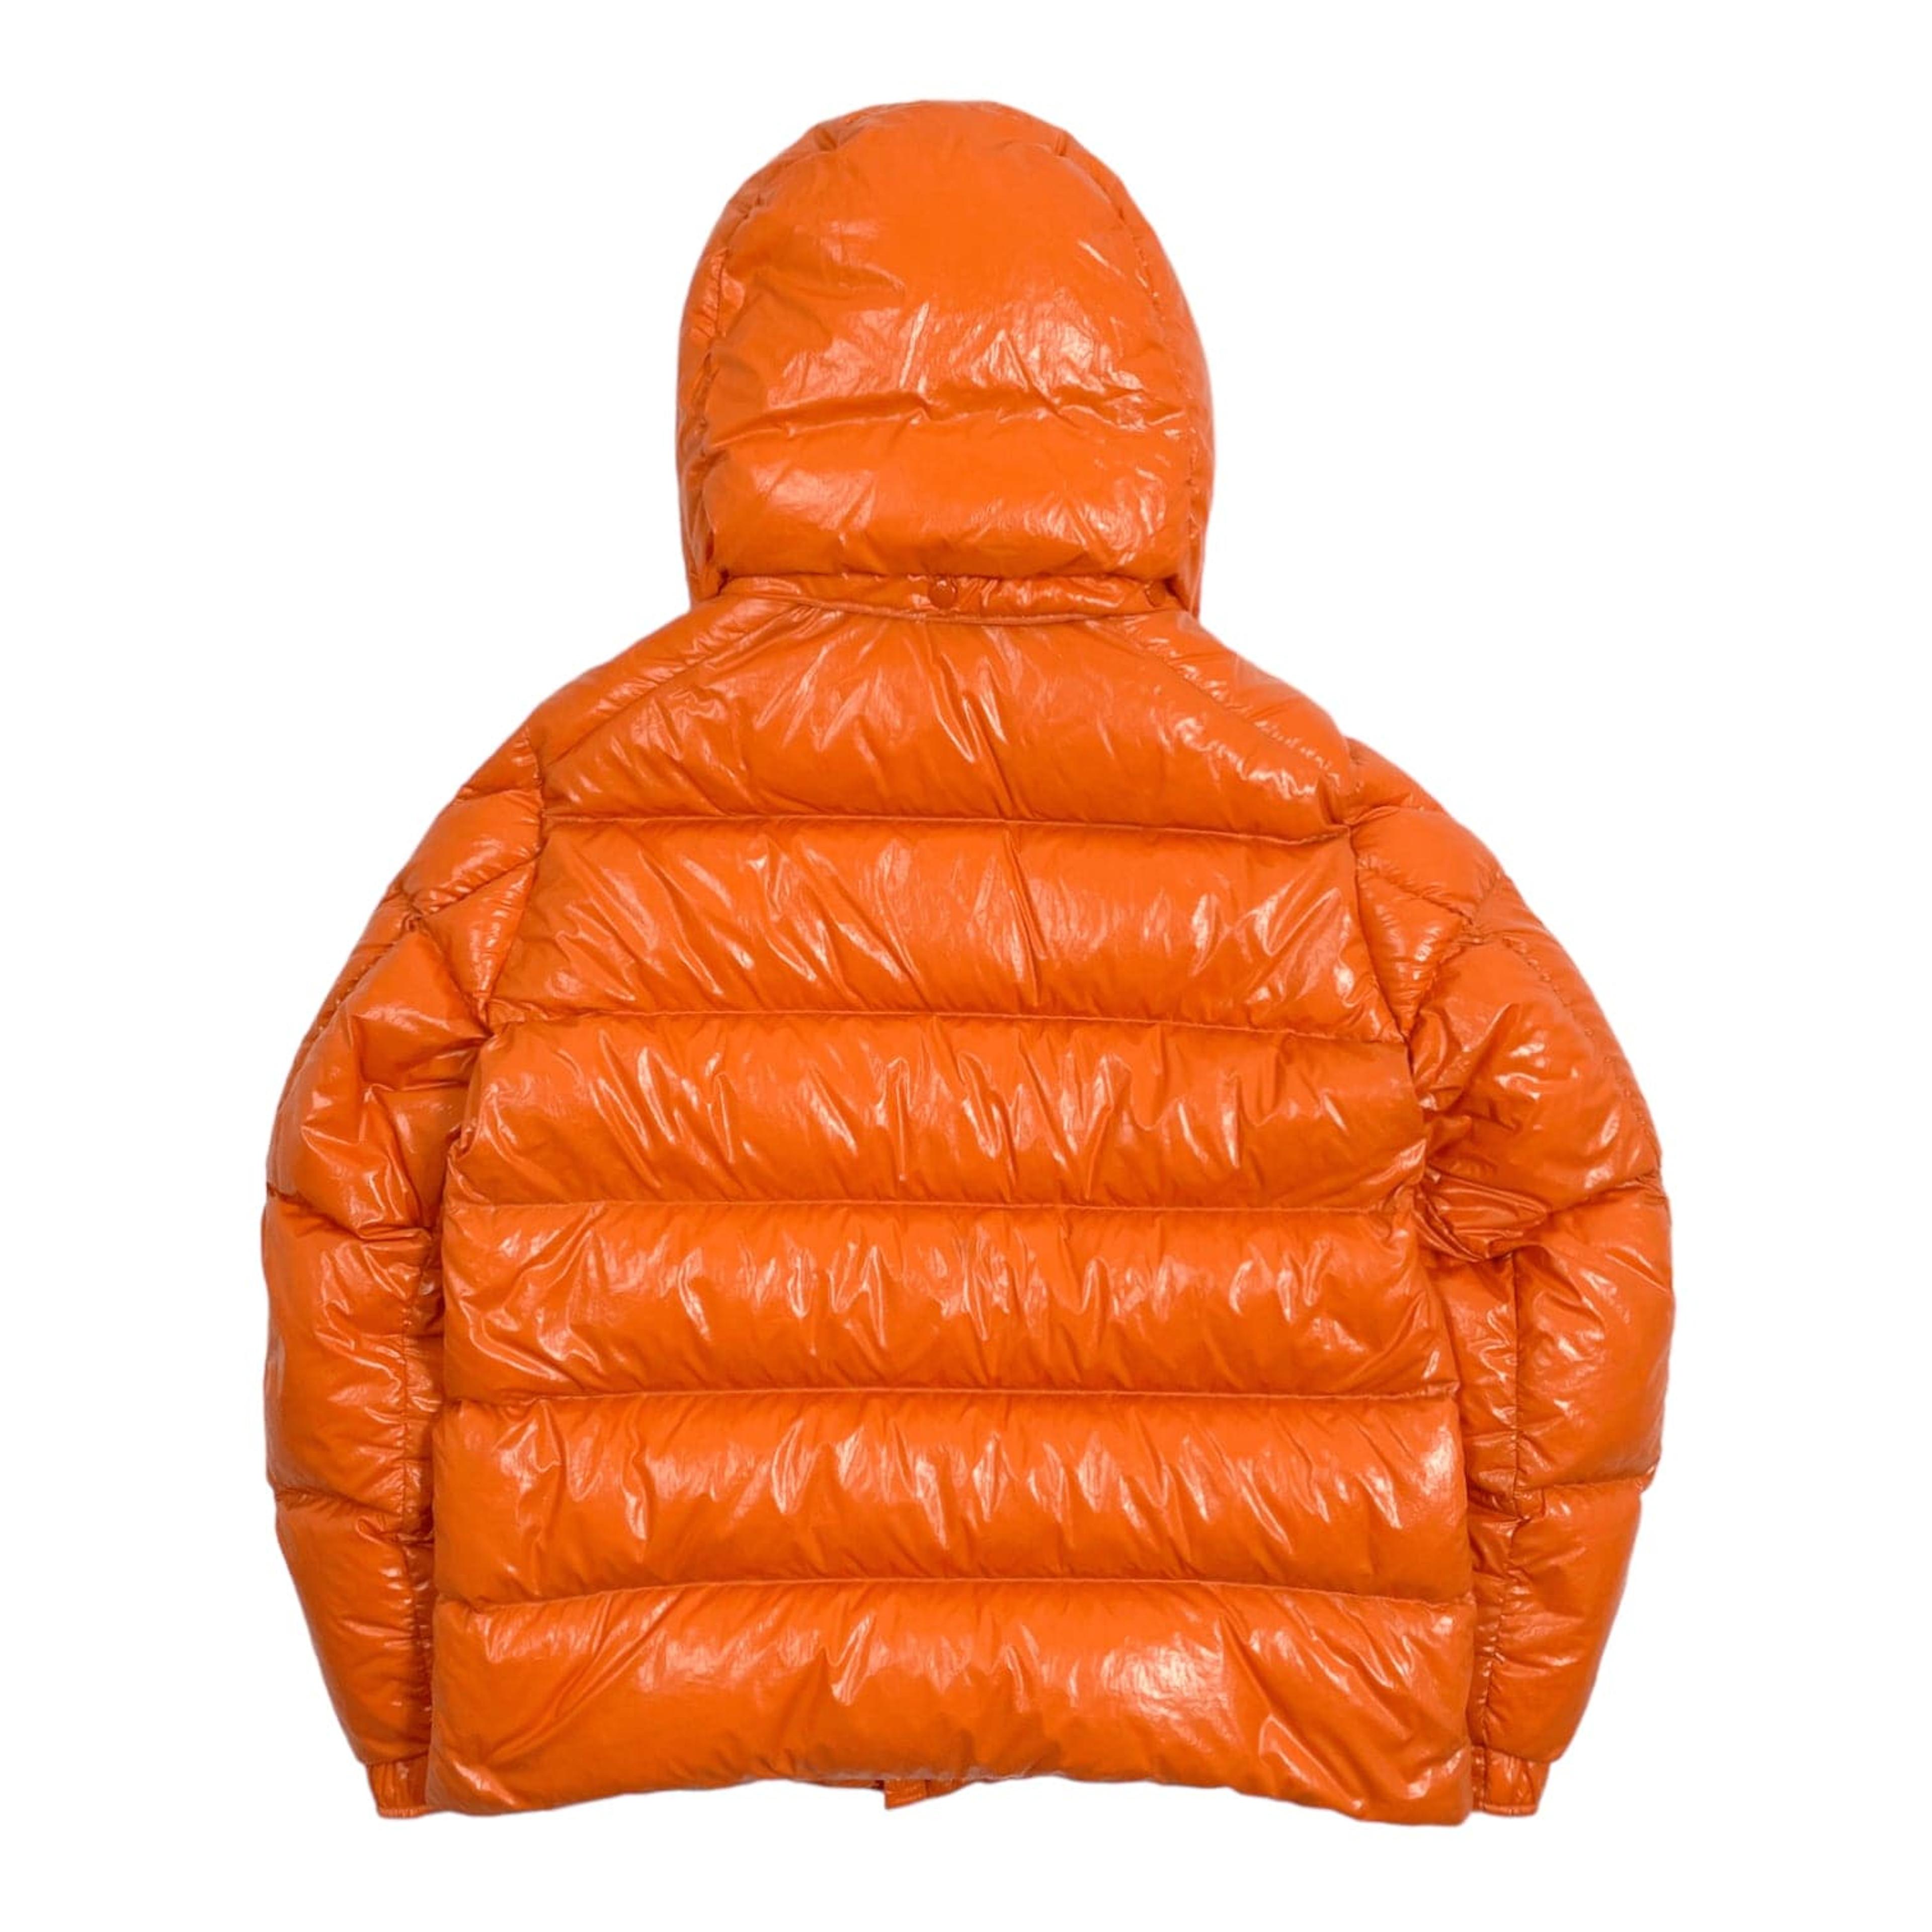 Alternate View 3 of Moncler Maya 70th Anniversary Special Edition Campfire Orange